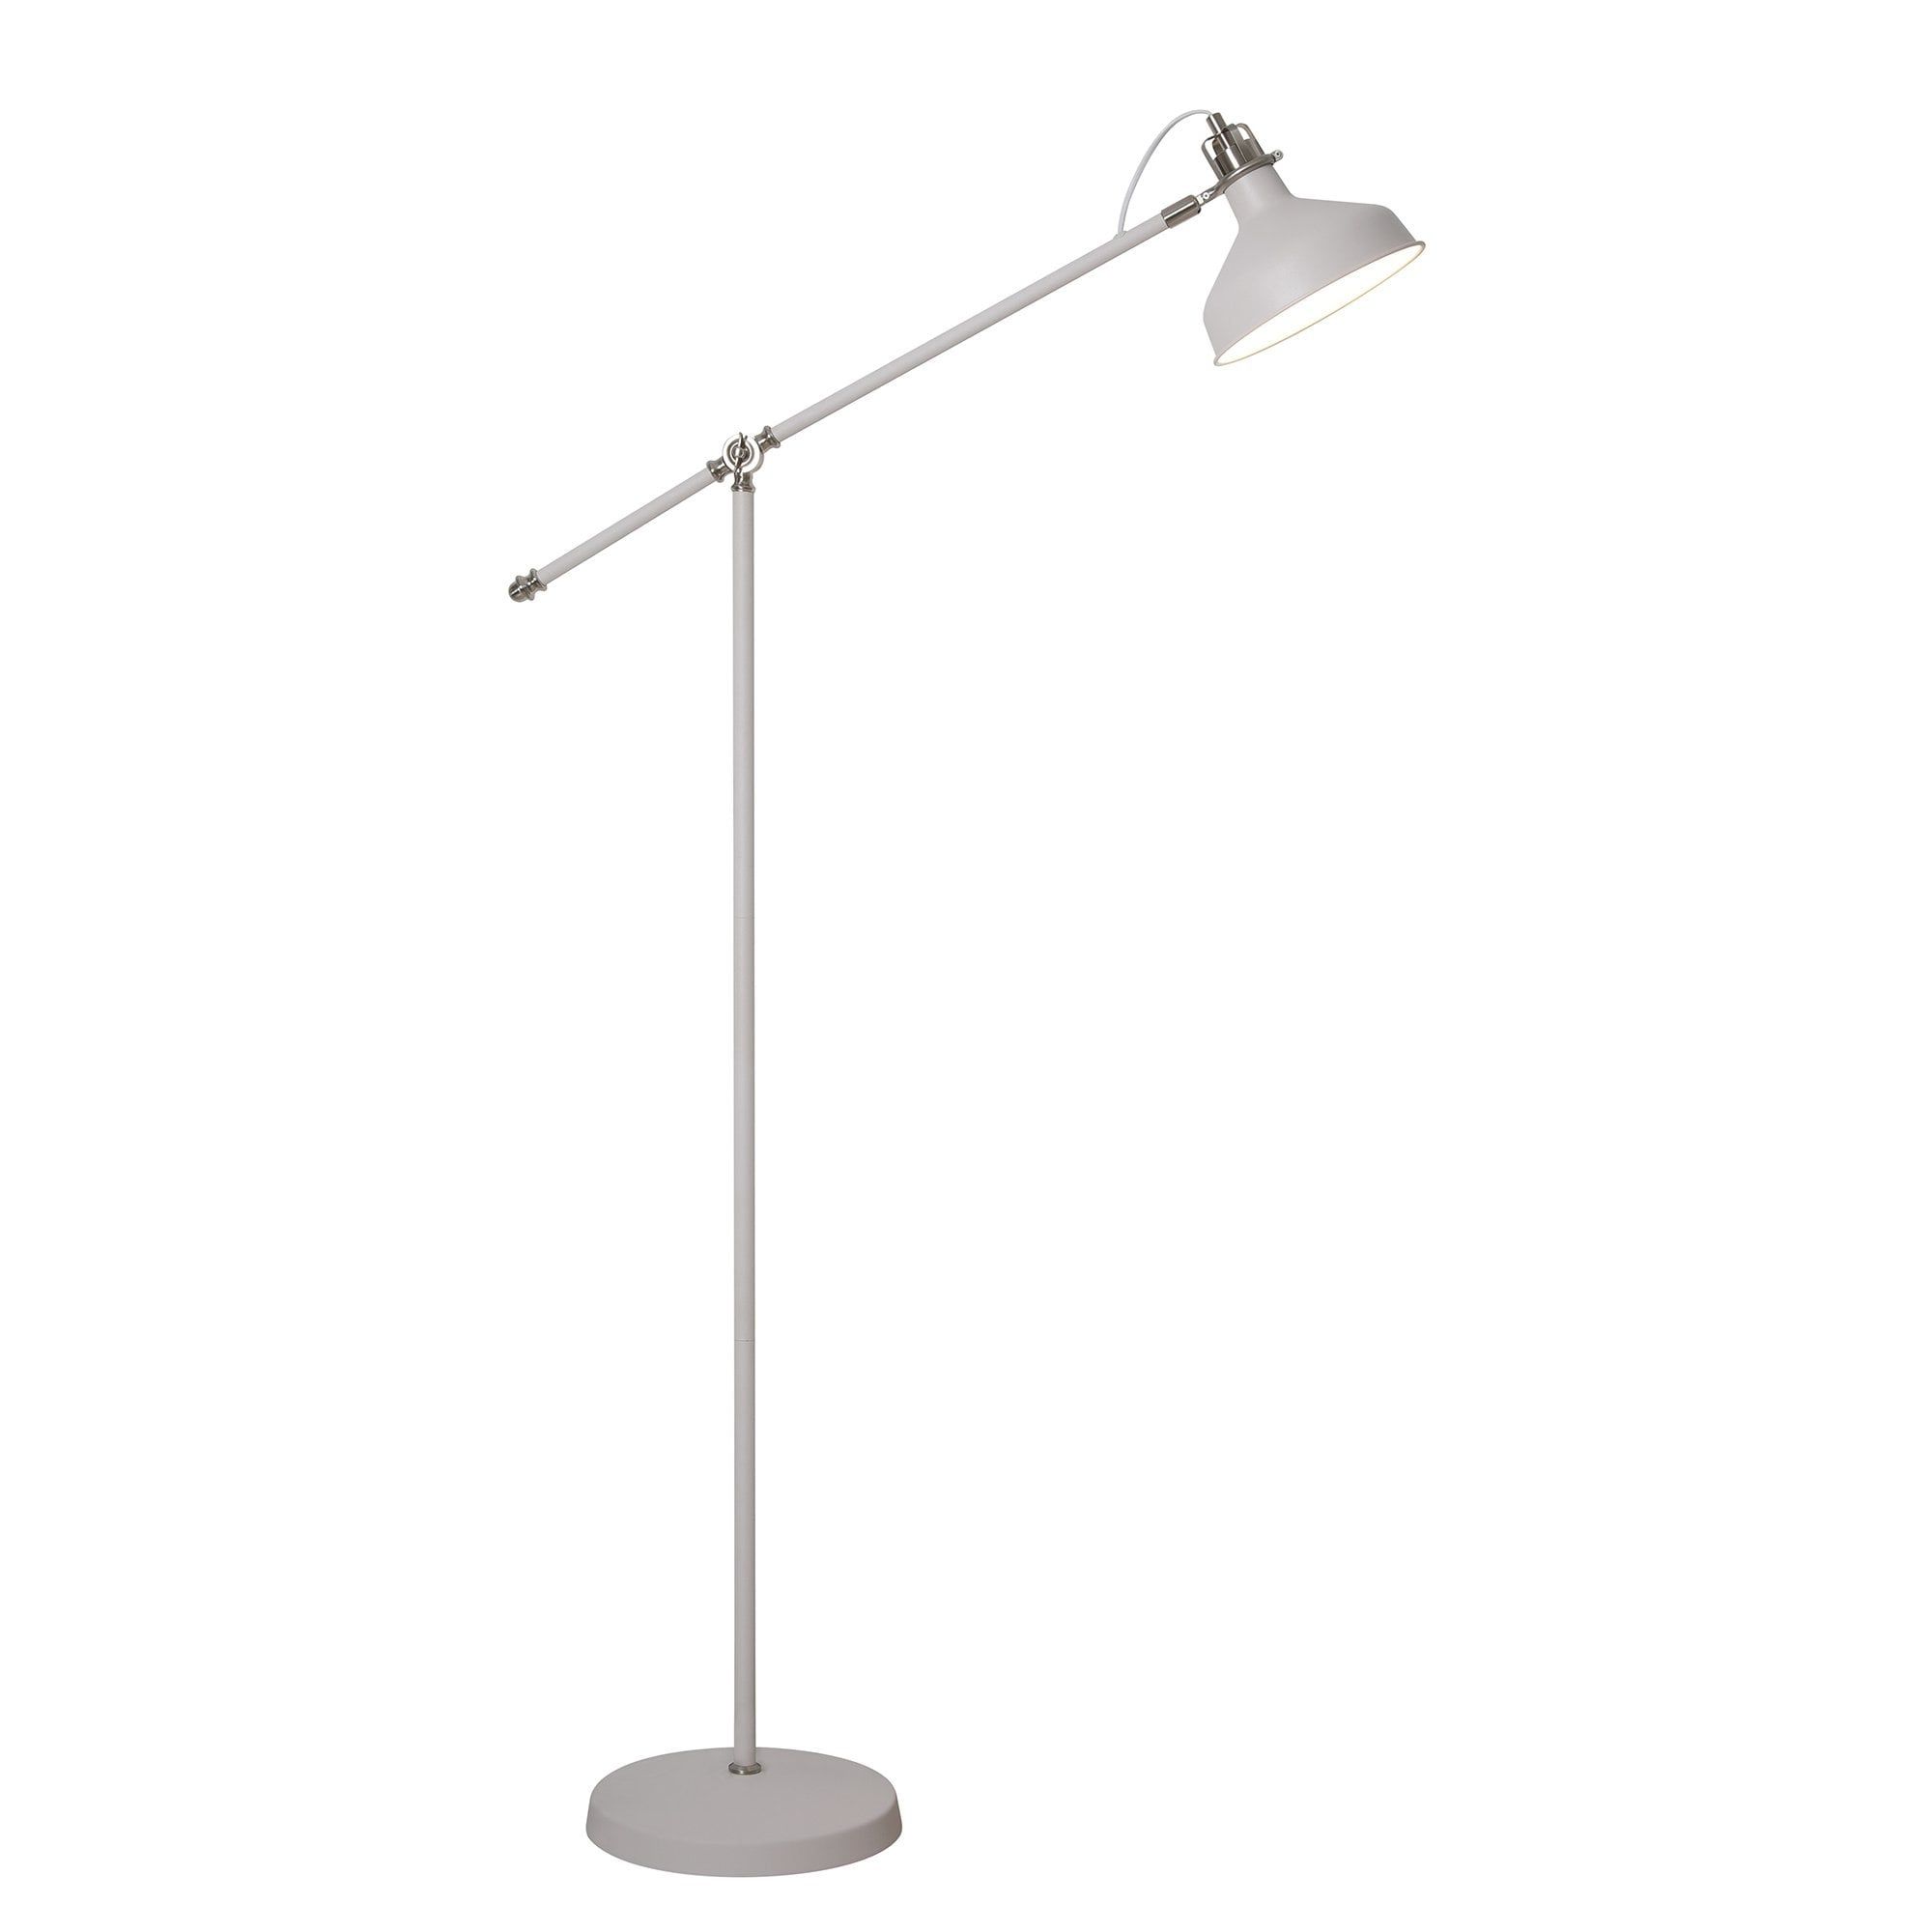 Retro Style Angled White Floor Standing Lamp With Chrome Highlights Pertaining To Cantilever Floor Lamps (Gallery 19 of 20)